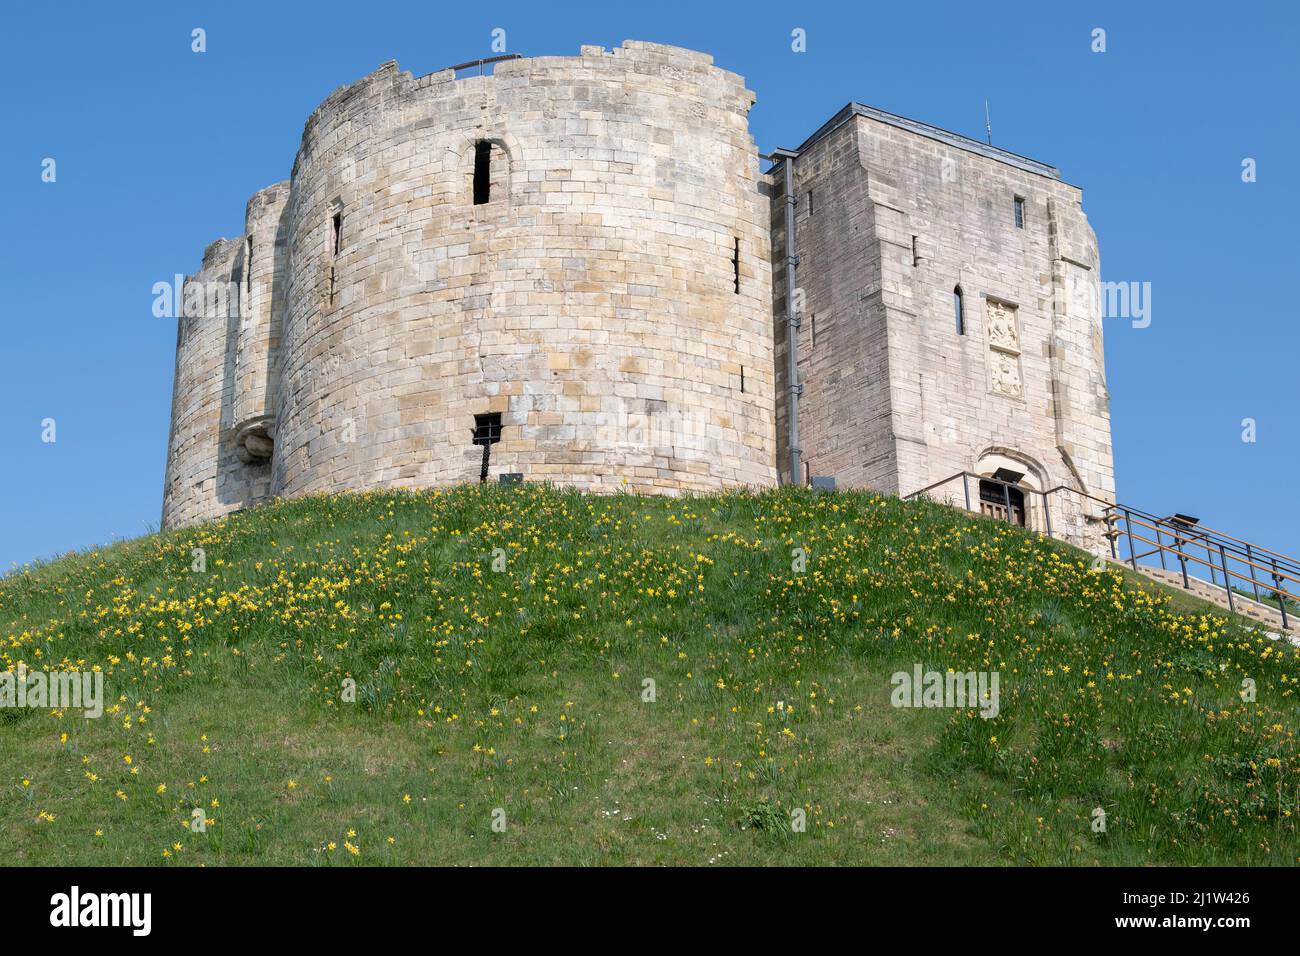 Clifford's Tower (York Castle) in York surrounded by Daffodils in Spring. Stock Photo